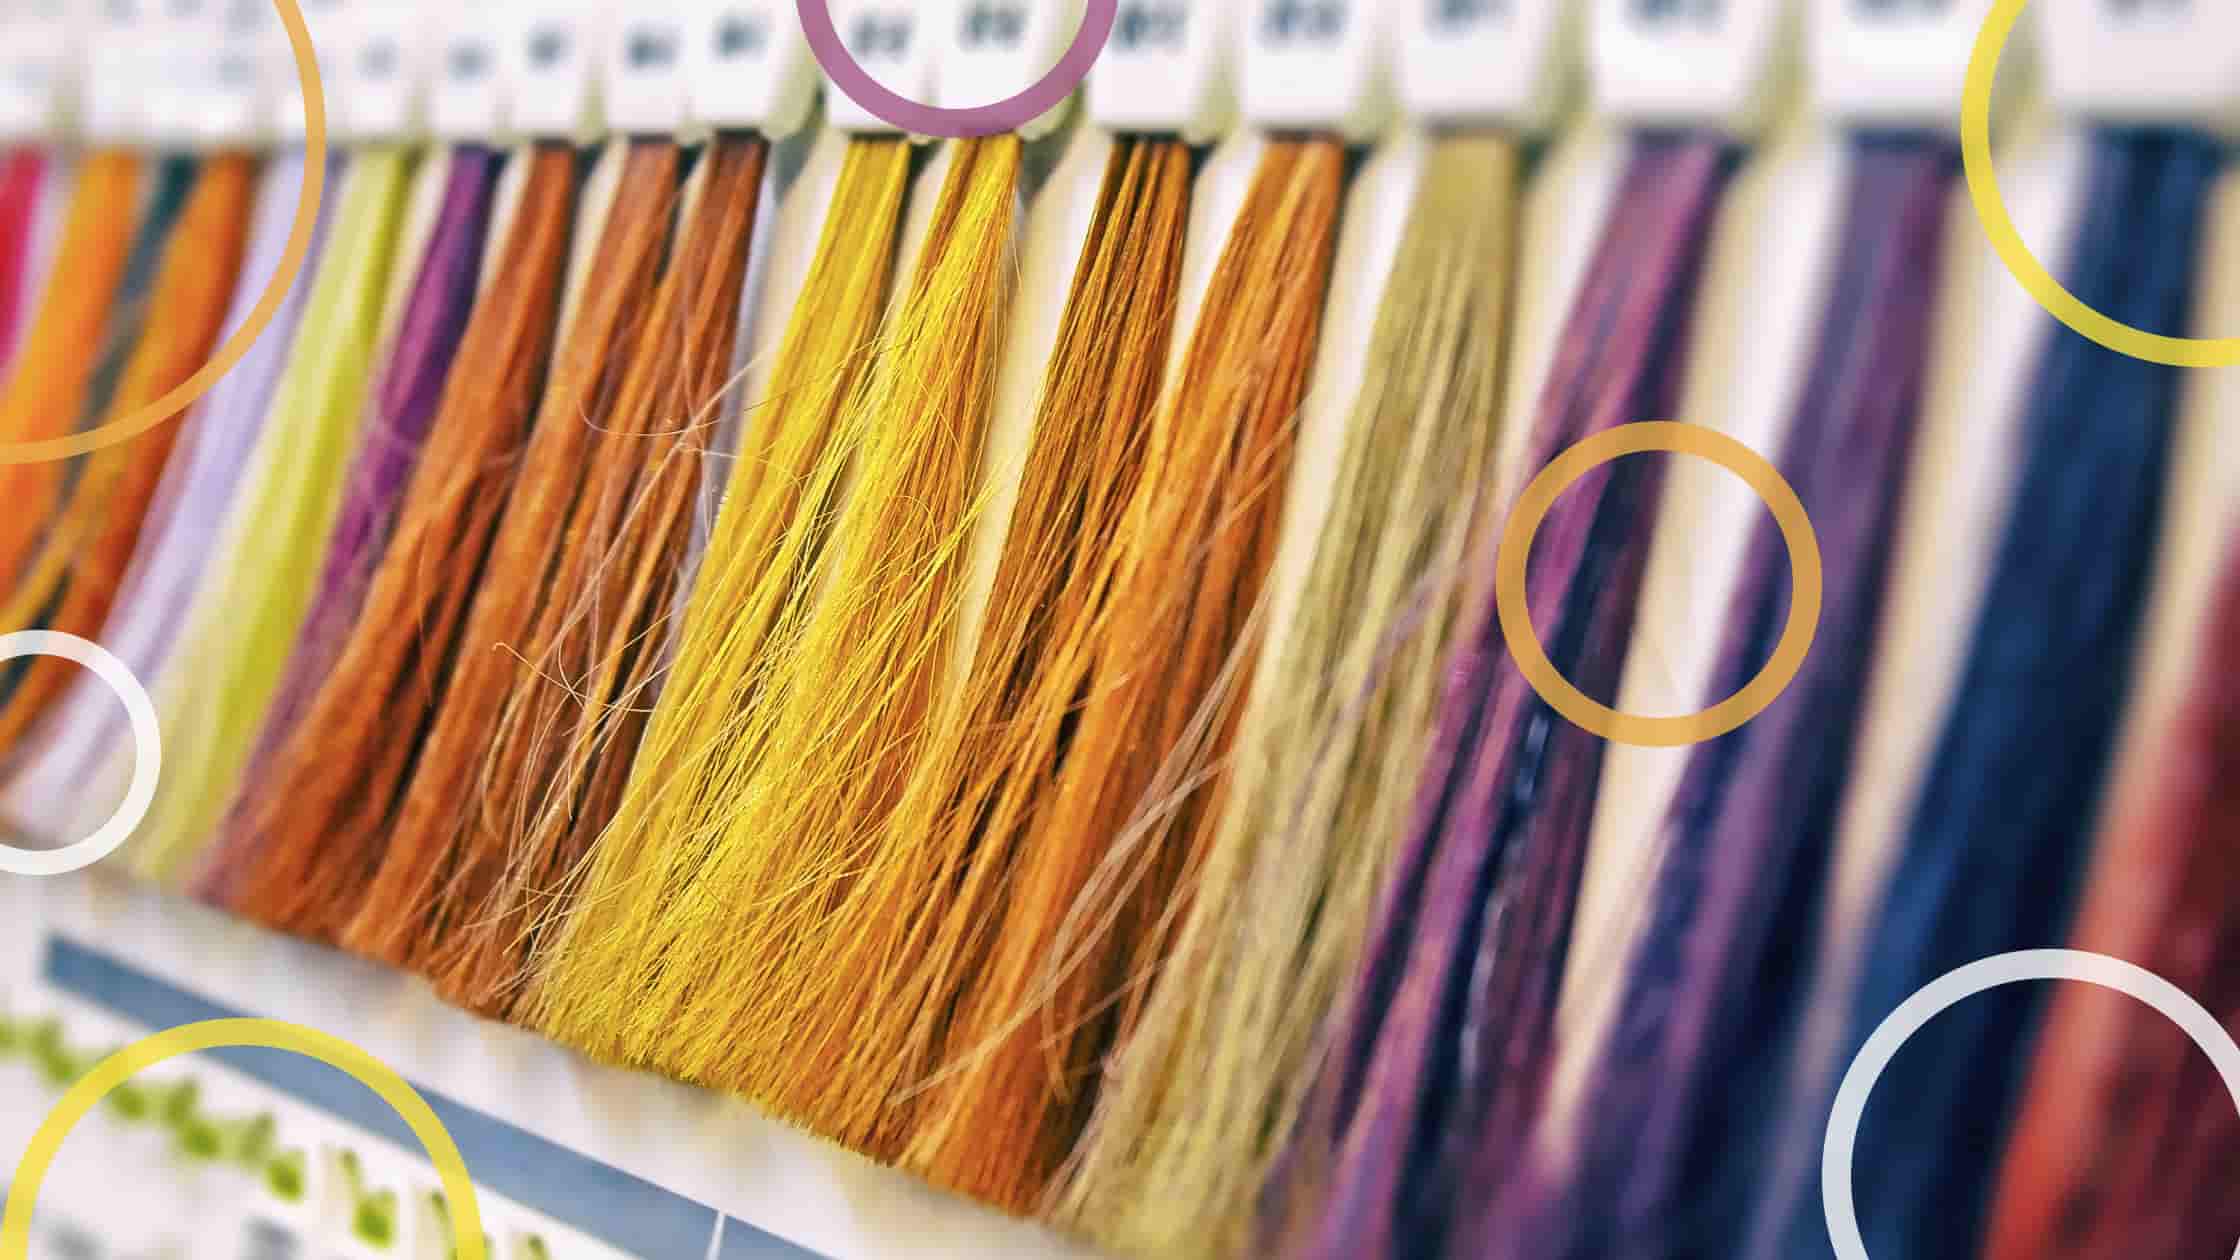 4. Blue Ombre Synthetic Hair Extensions - wide 6